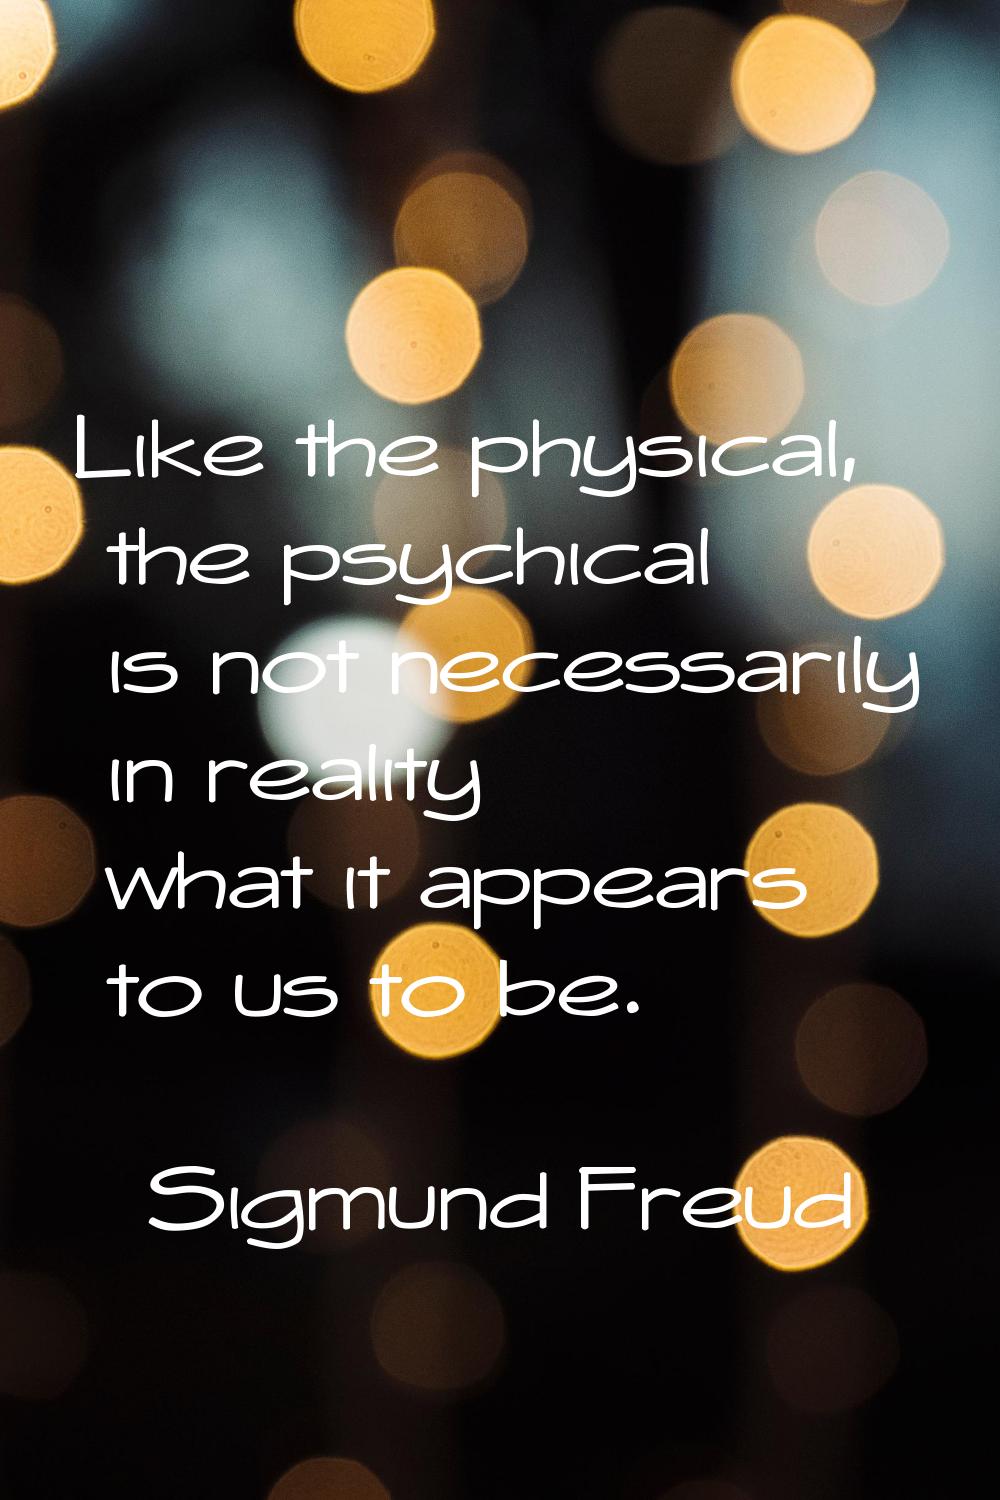 Like the physical, the psychical is not necessarily in reality what it appears to us to be.